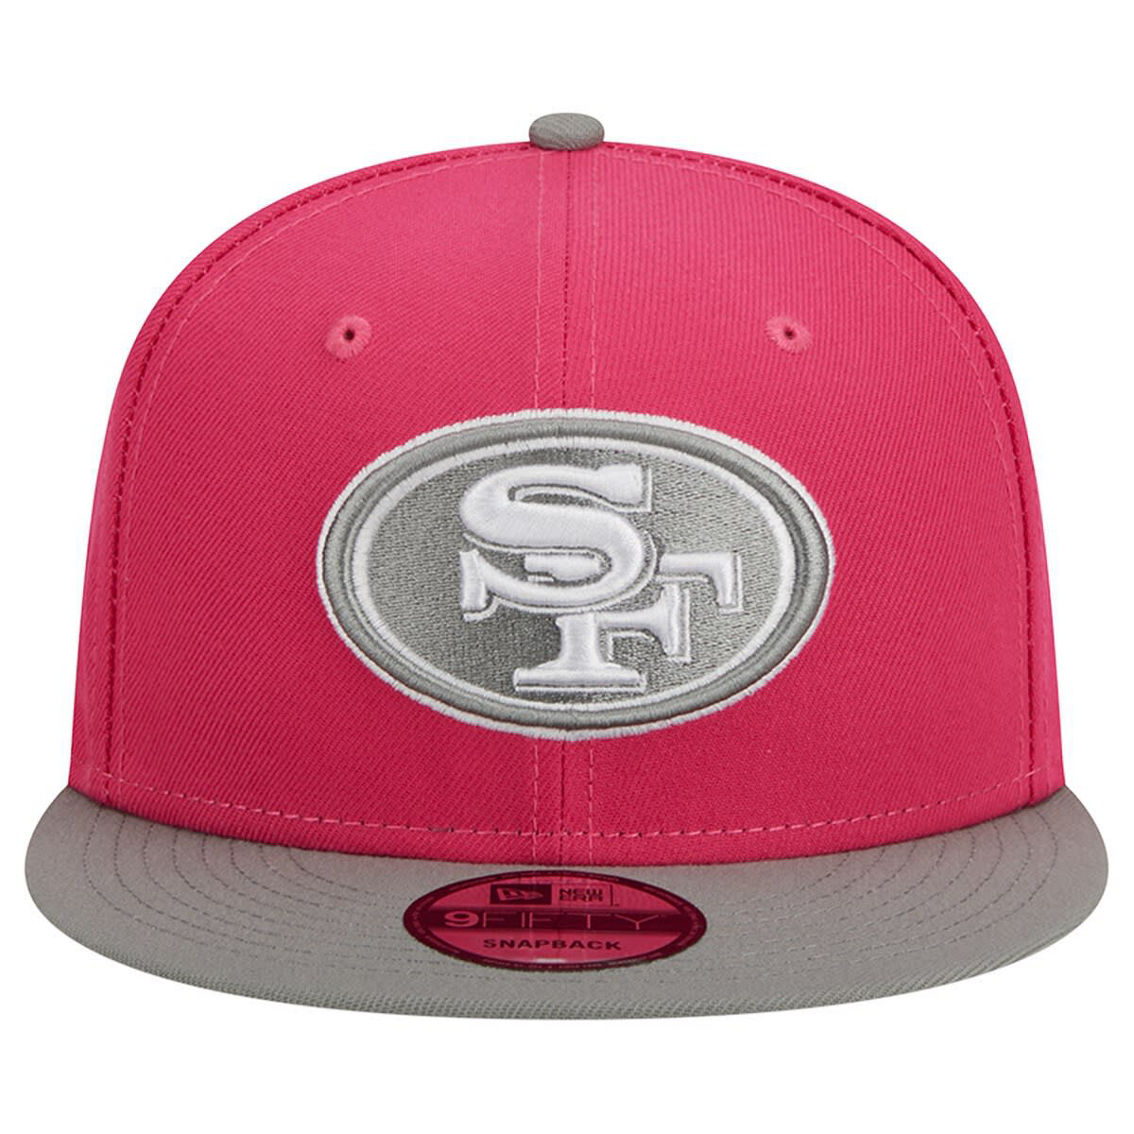 New Era Men's Pink/Gray San Francisco 49ers 2-Tone Color Pack 9FIFTY Snapback Hat - Image 3 of 4